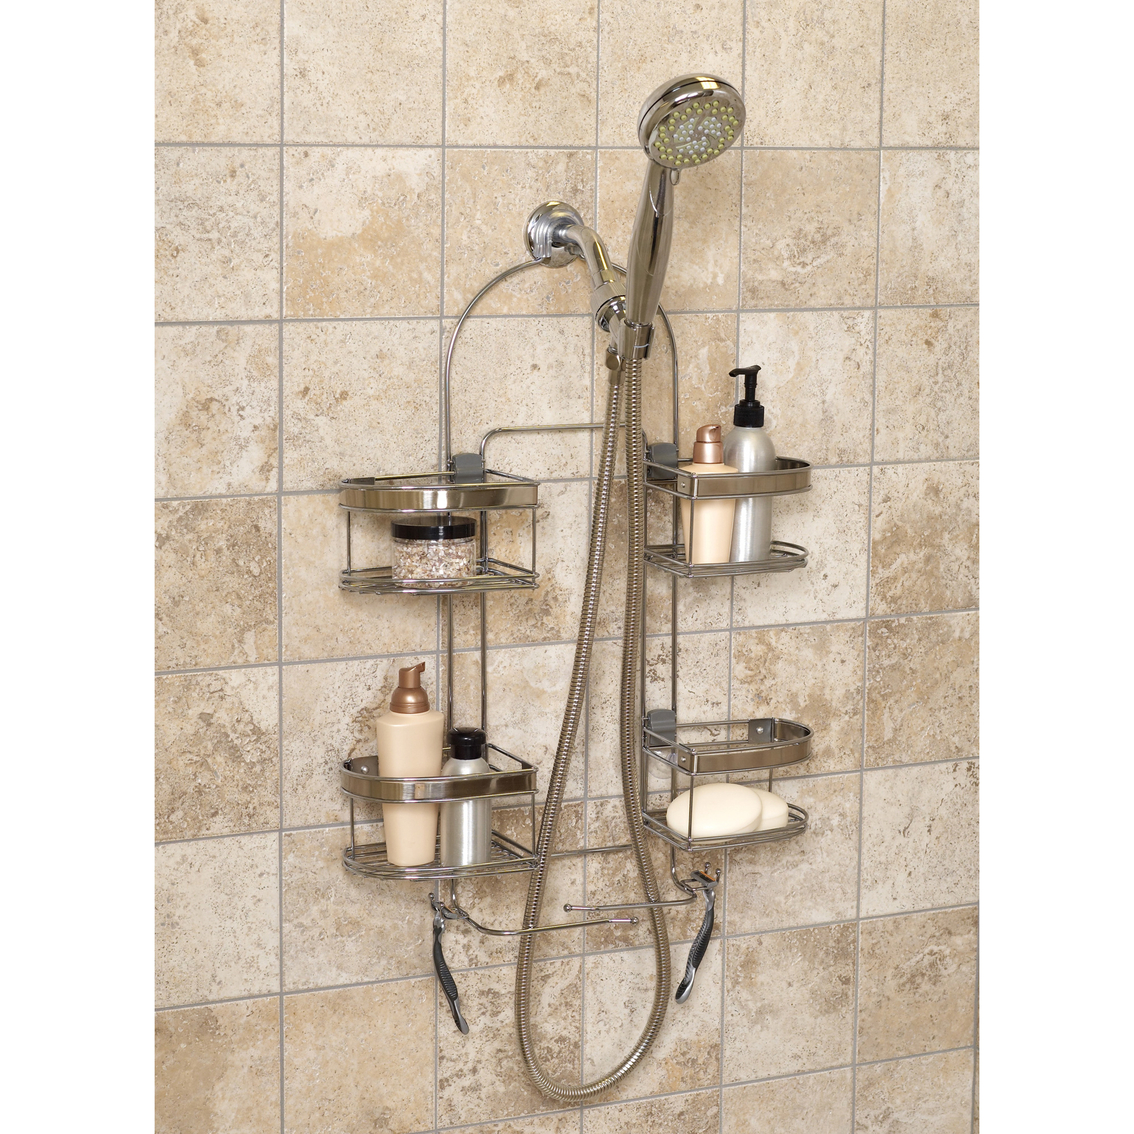 Zenna Home Stainless Steel Expandable Handheld Hose Over The Shower Caddy, Bath Accessories, Household